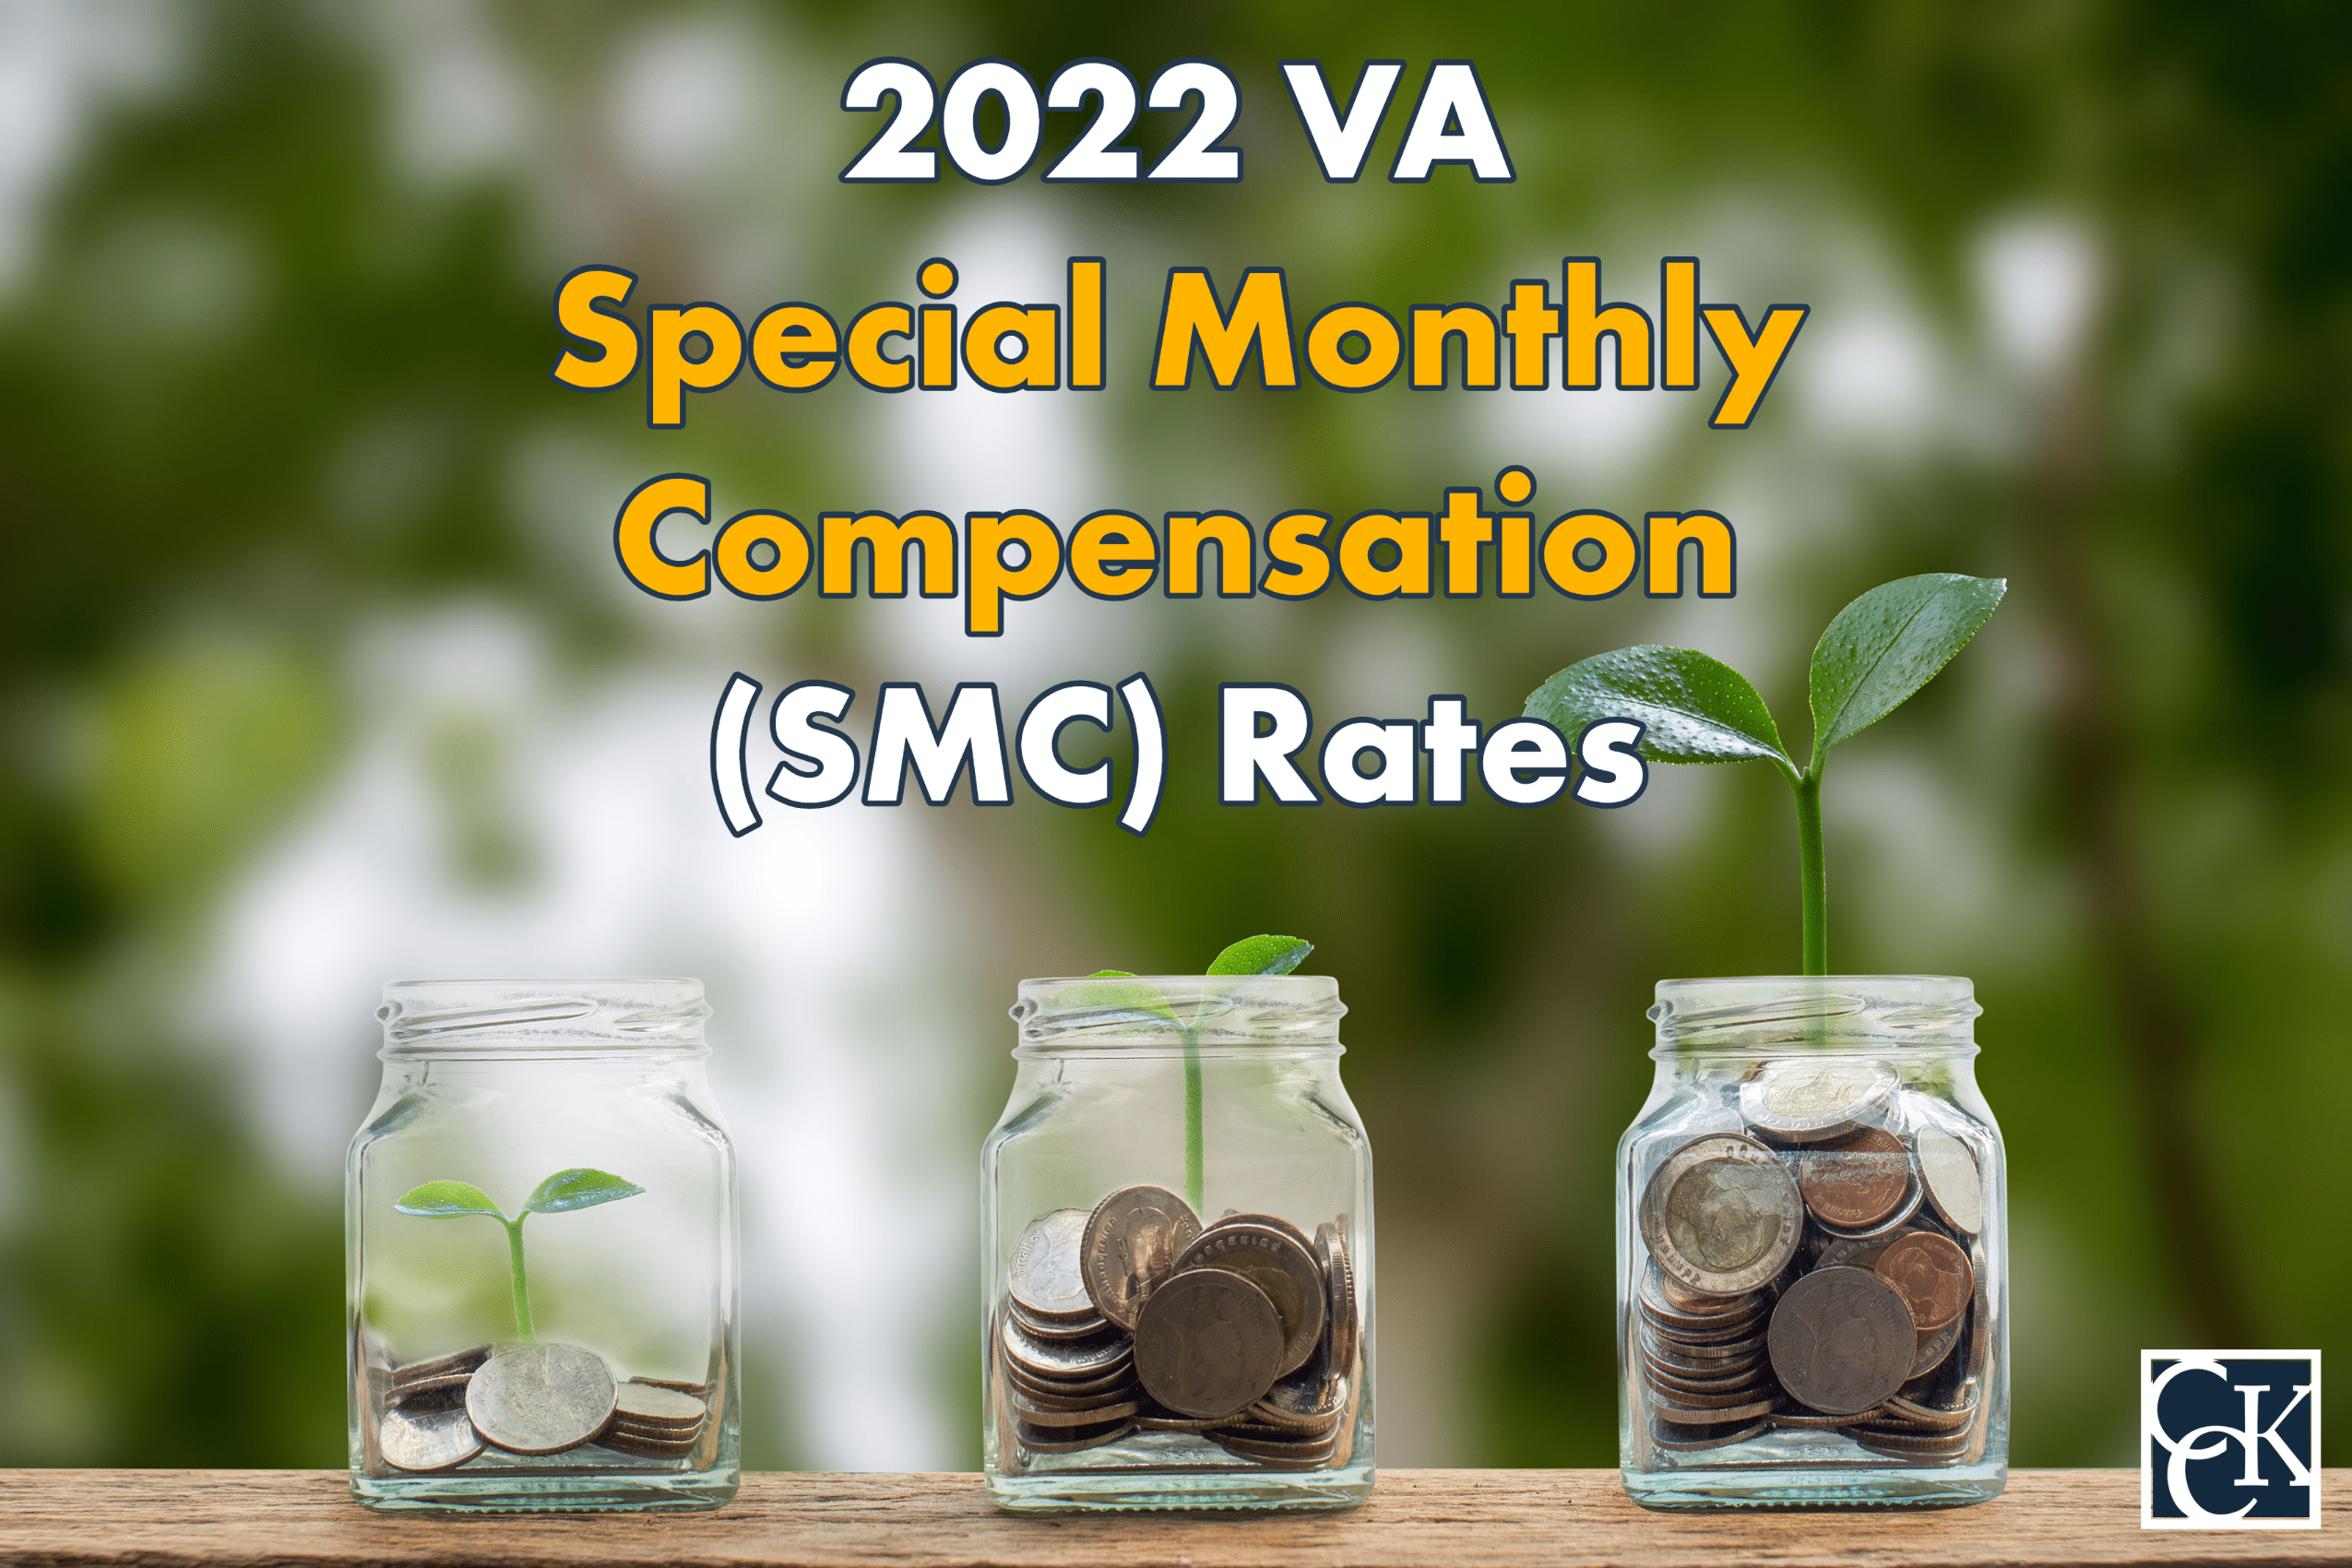 Va Special Monthly Compensation Rates